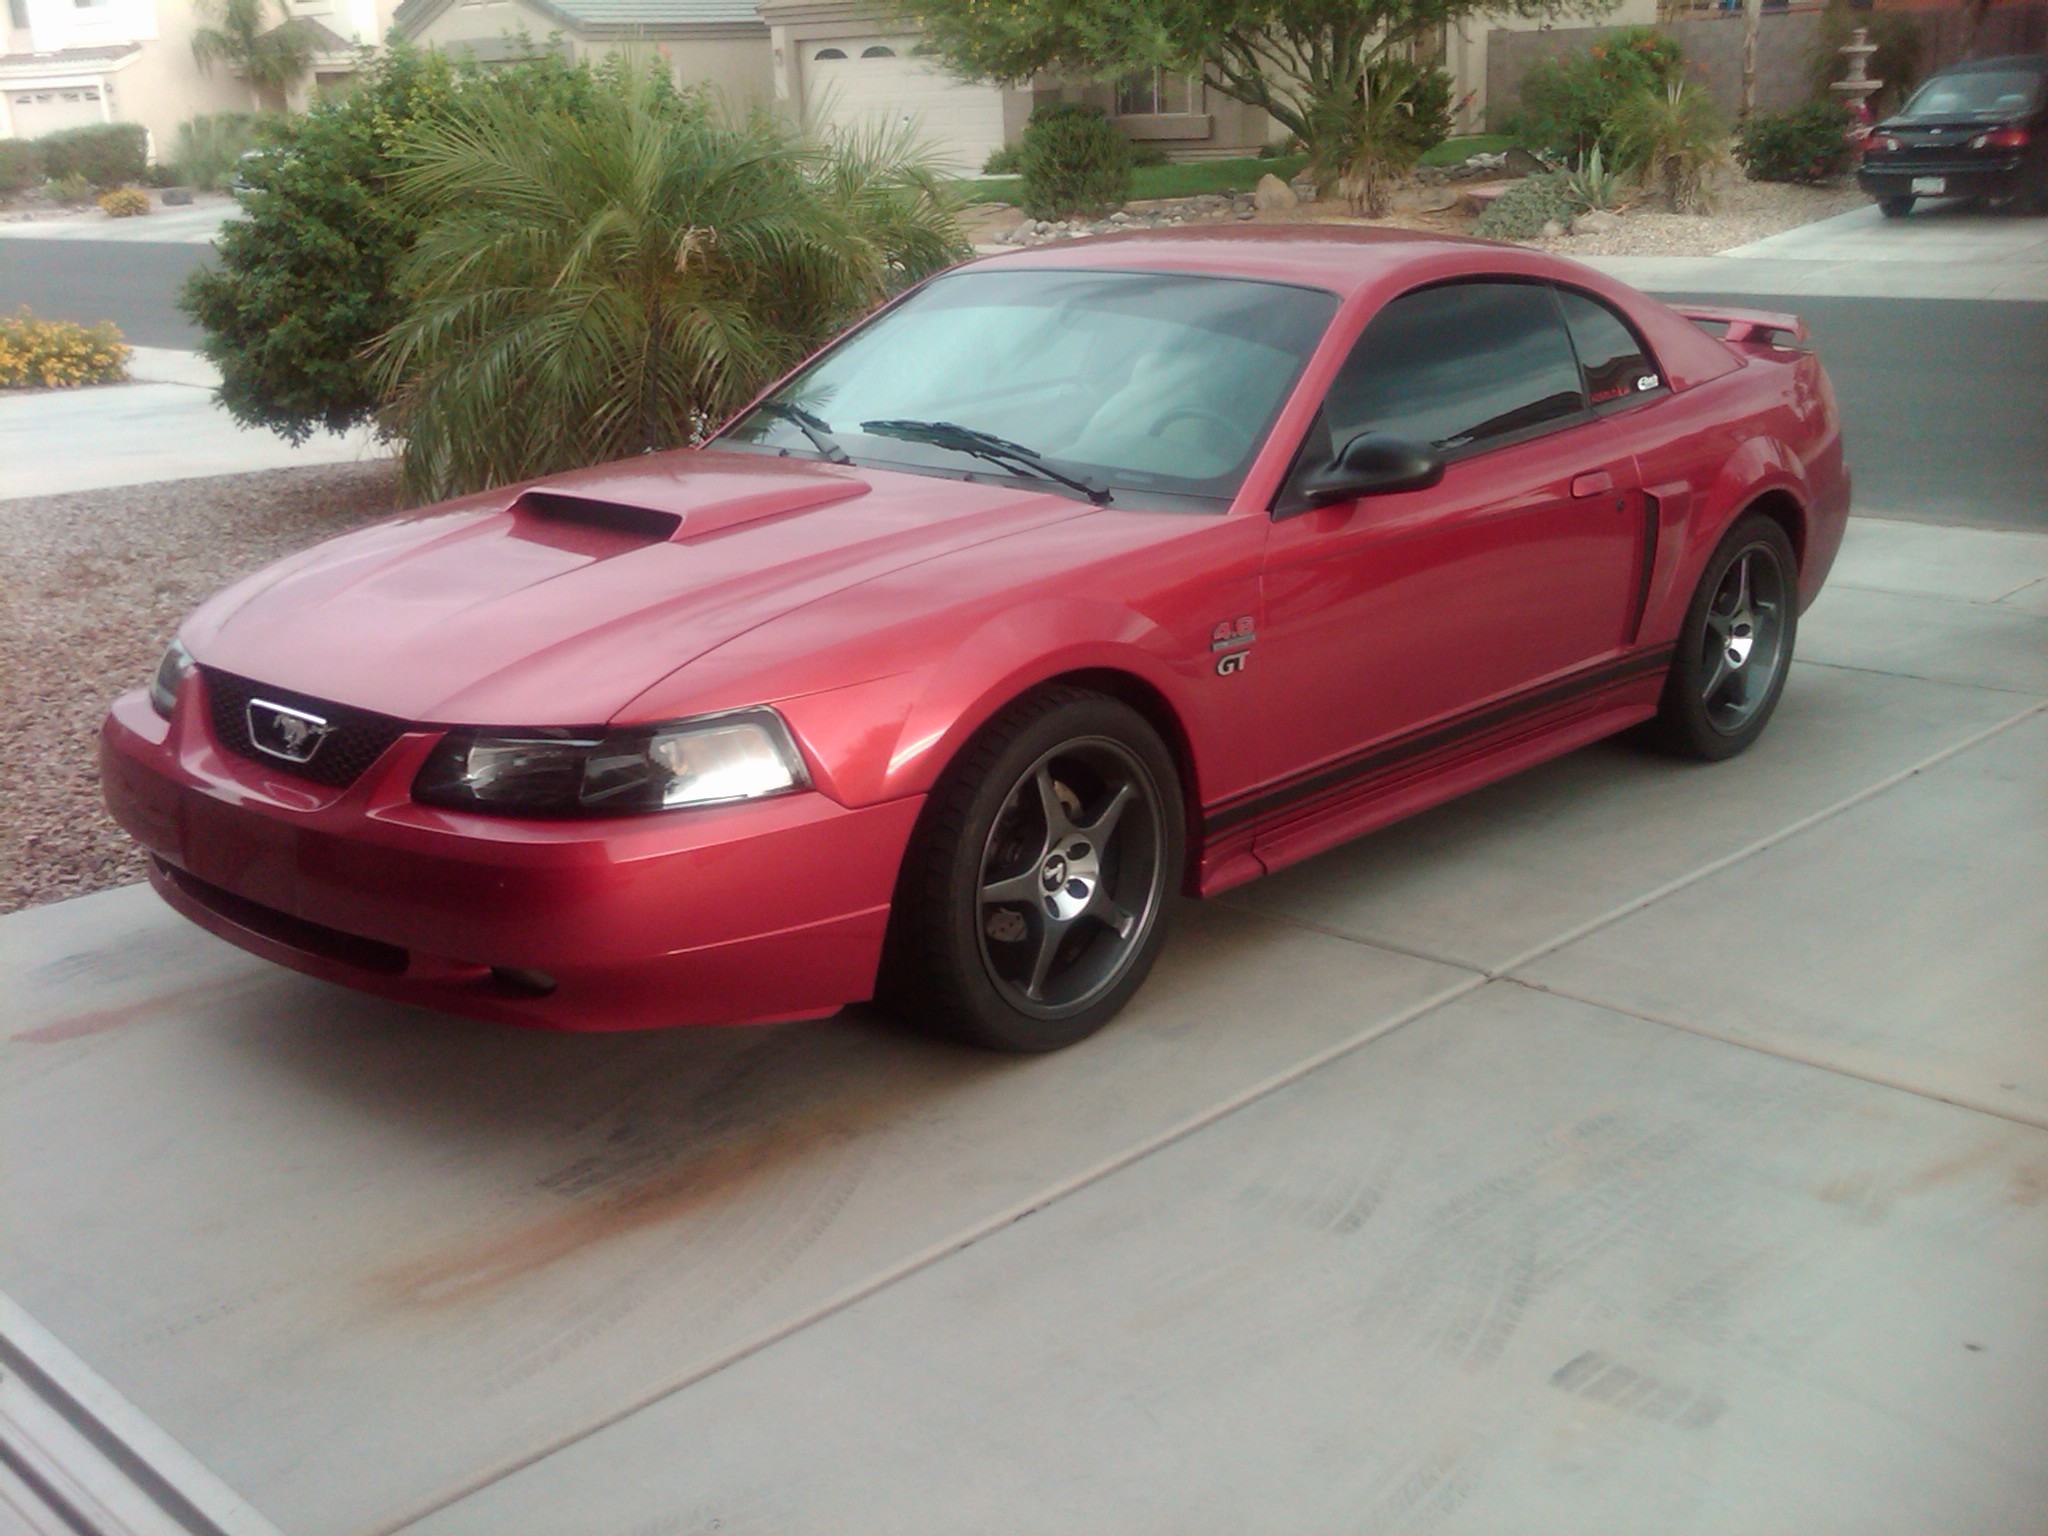  2001 Ford Mustang gt